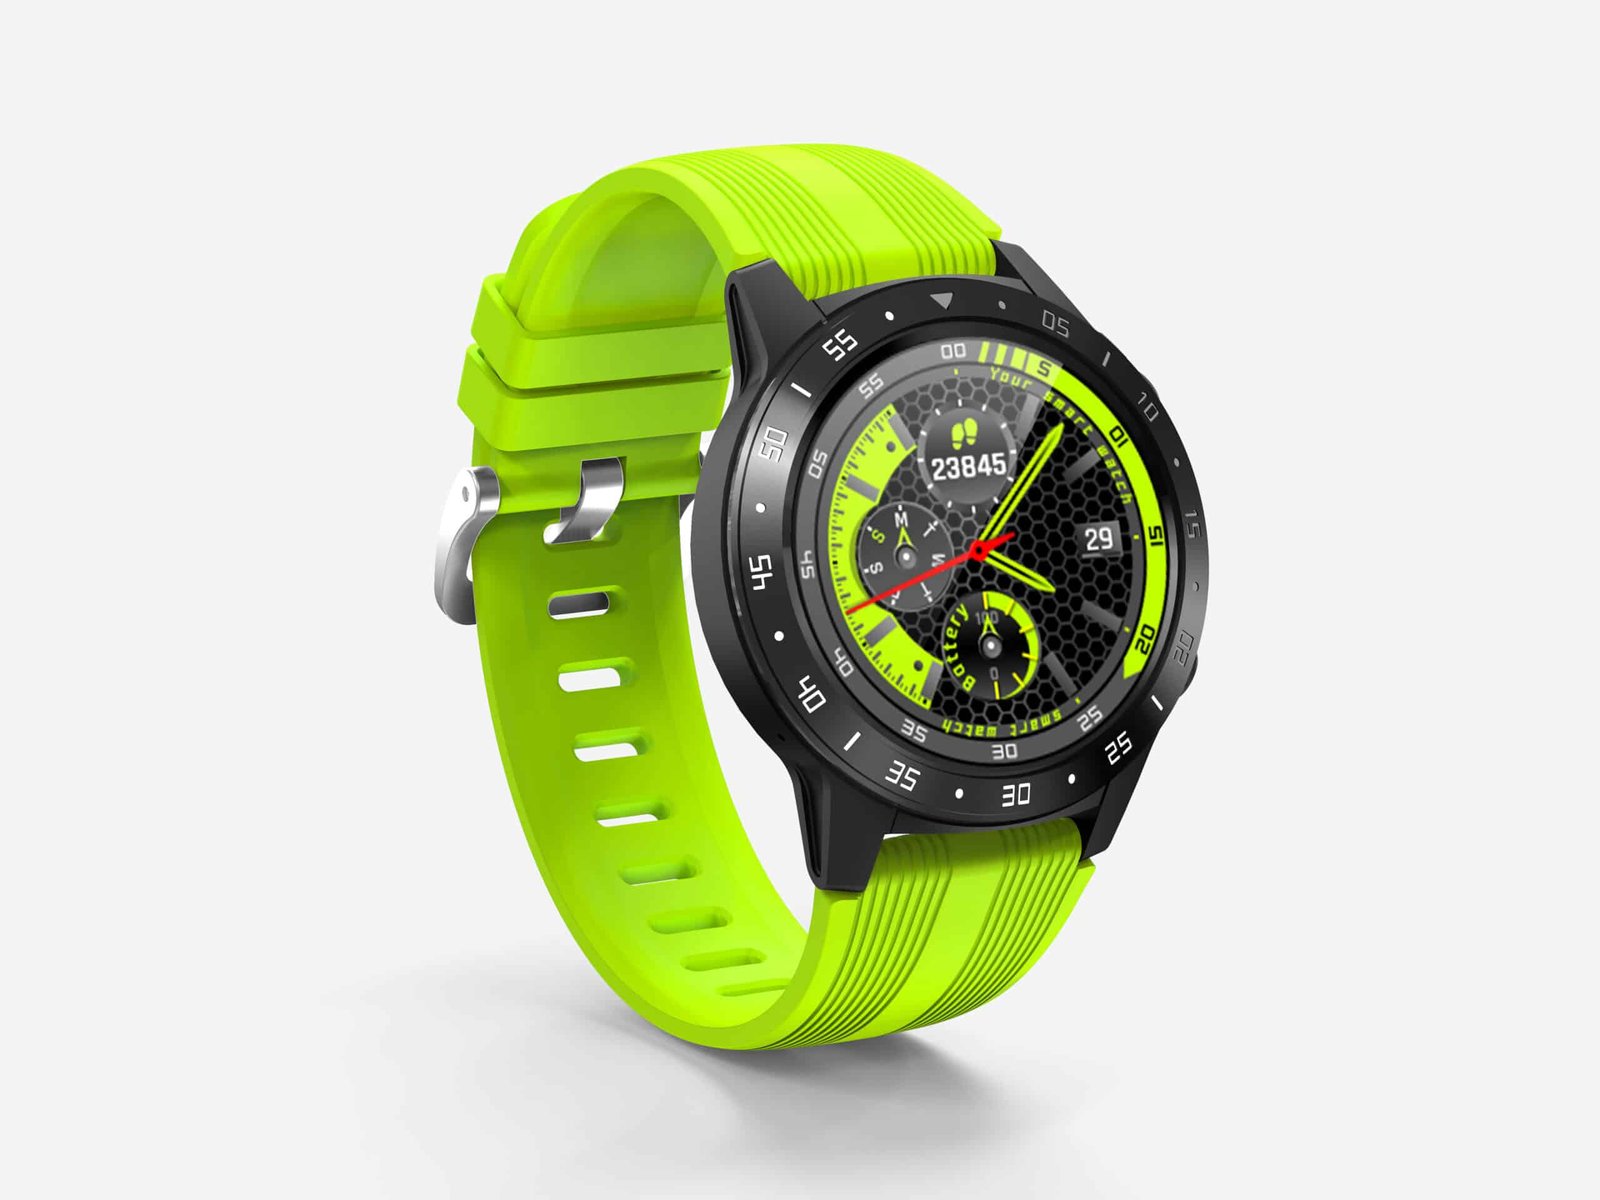  A black and green rugged smartwatch with fitness tracking, GPS, water resistance, altimeter, and barometer features.